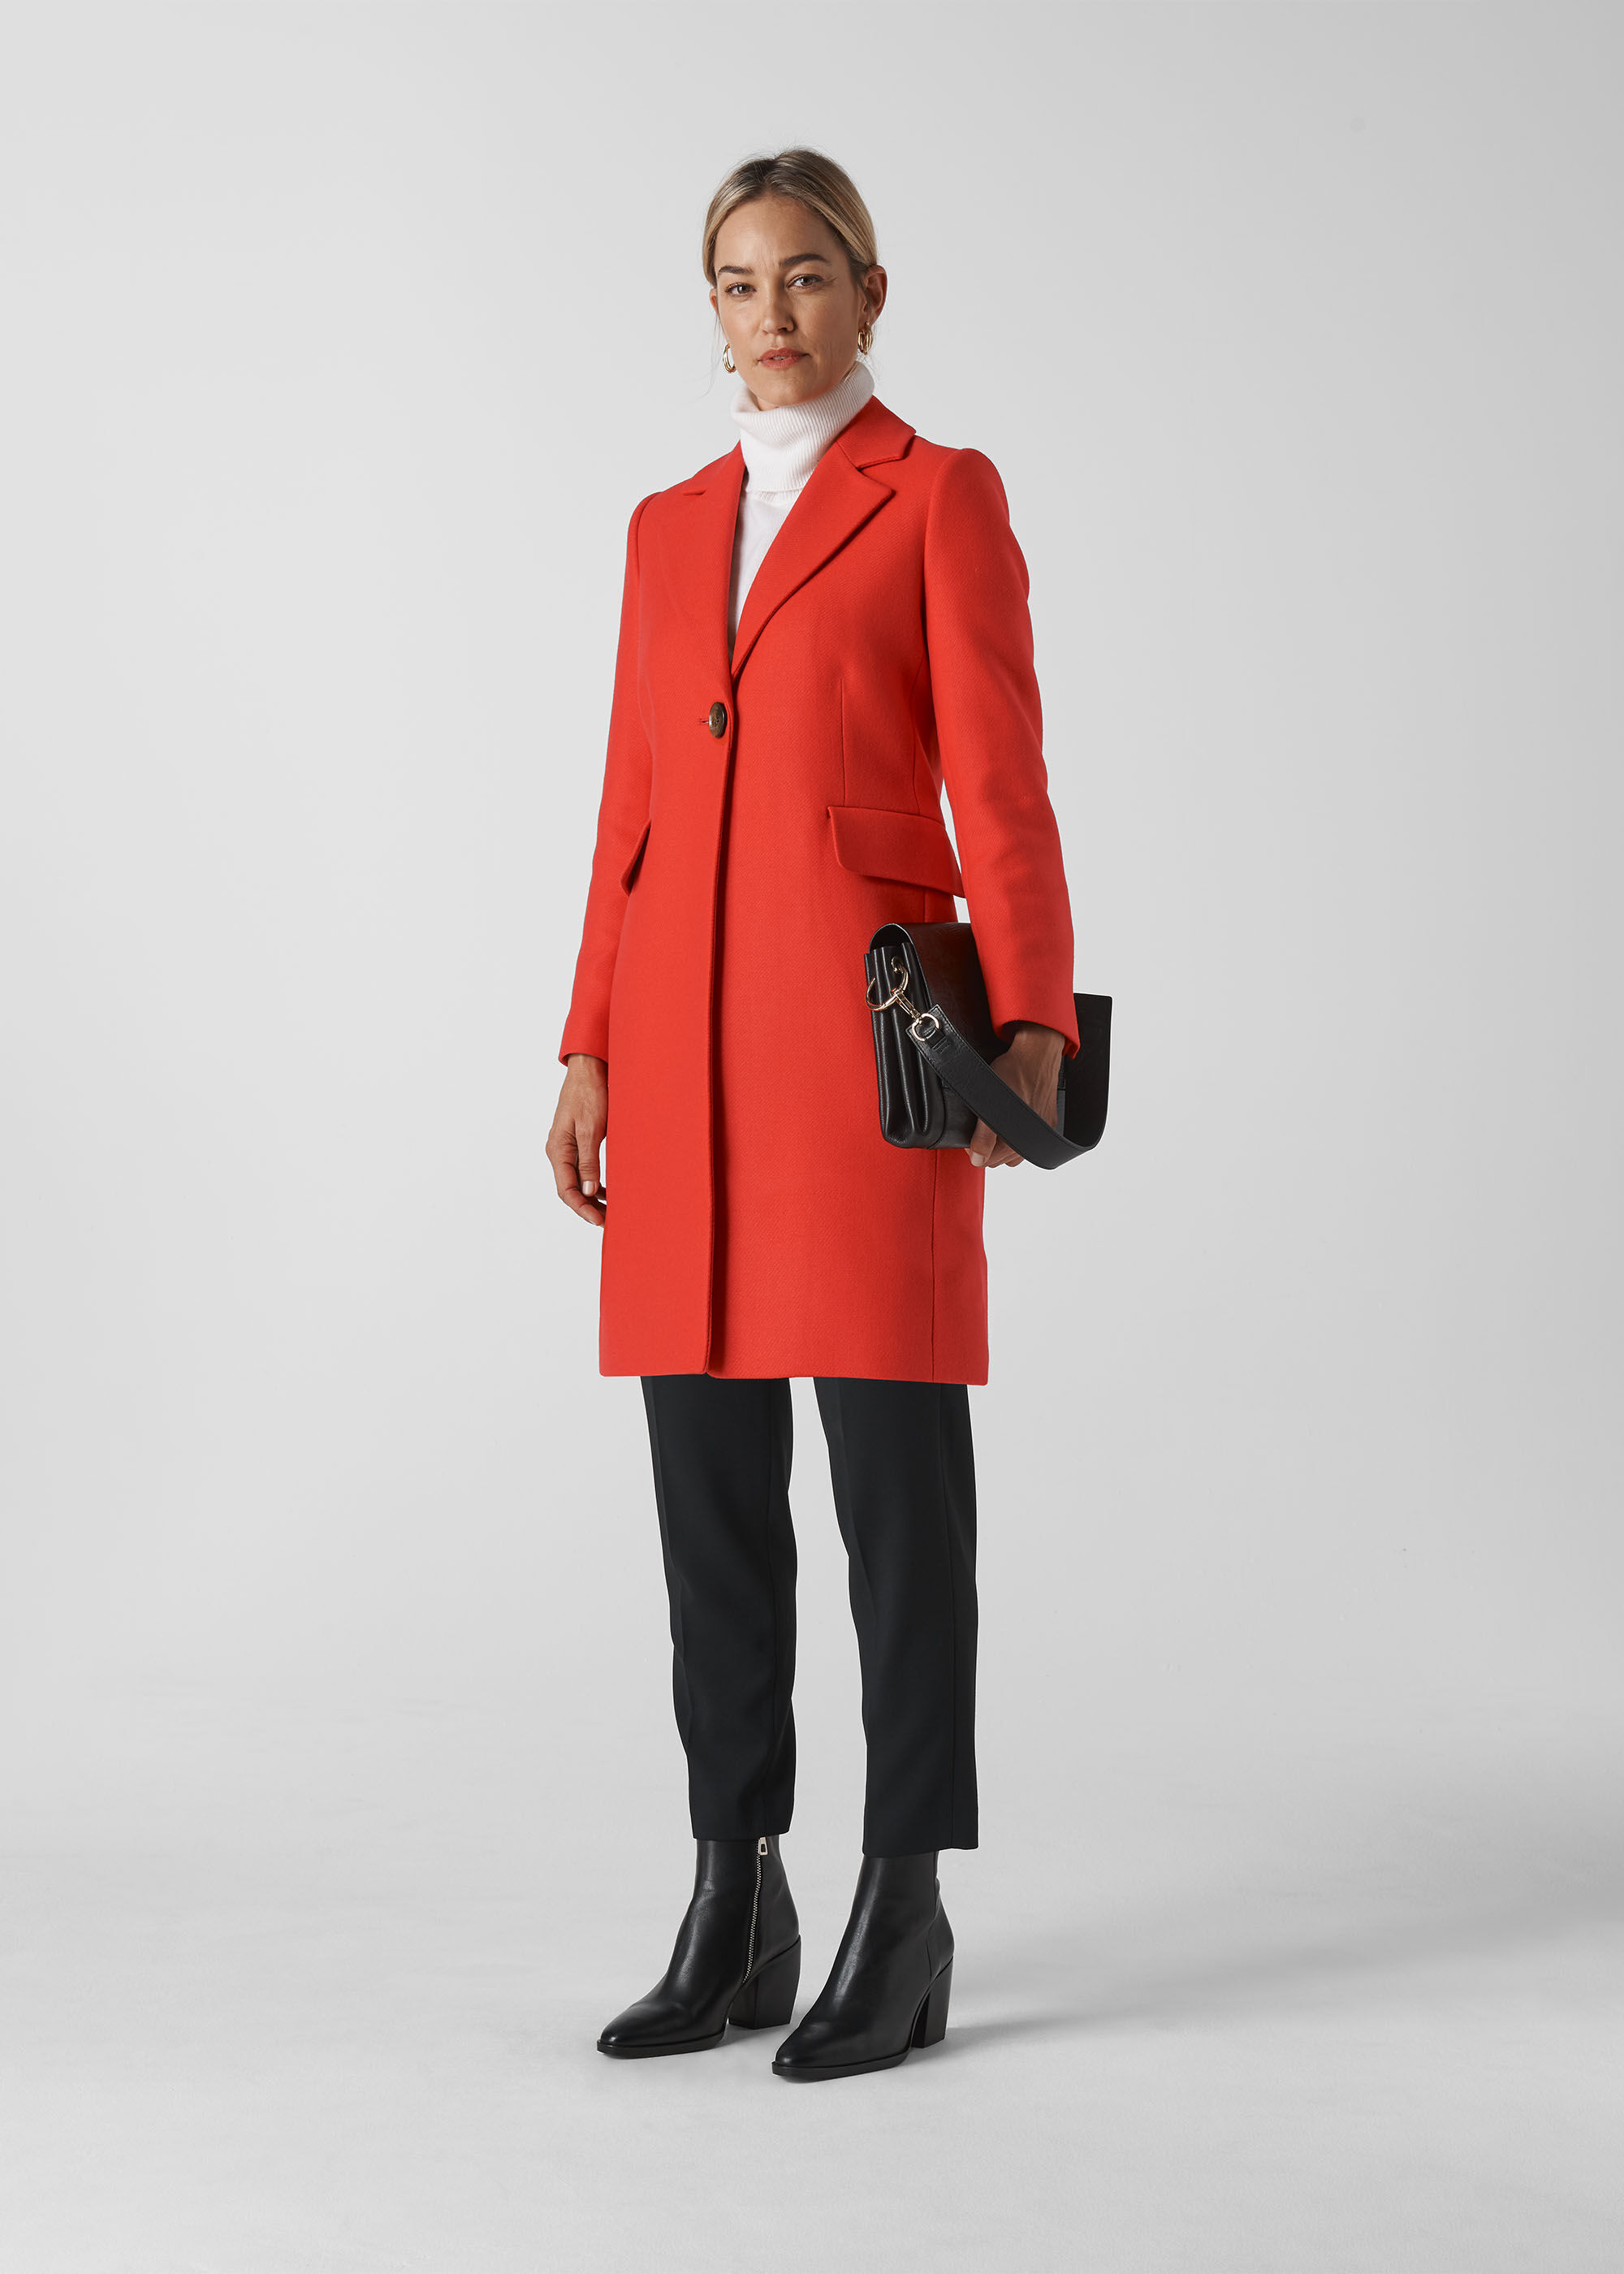 SIMPLY BE Damen Ladies Red Single Breasted Coat with Horn Button Detail Mantel